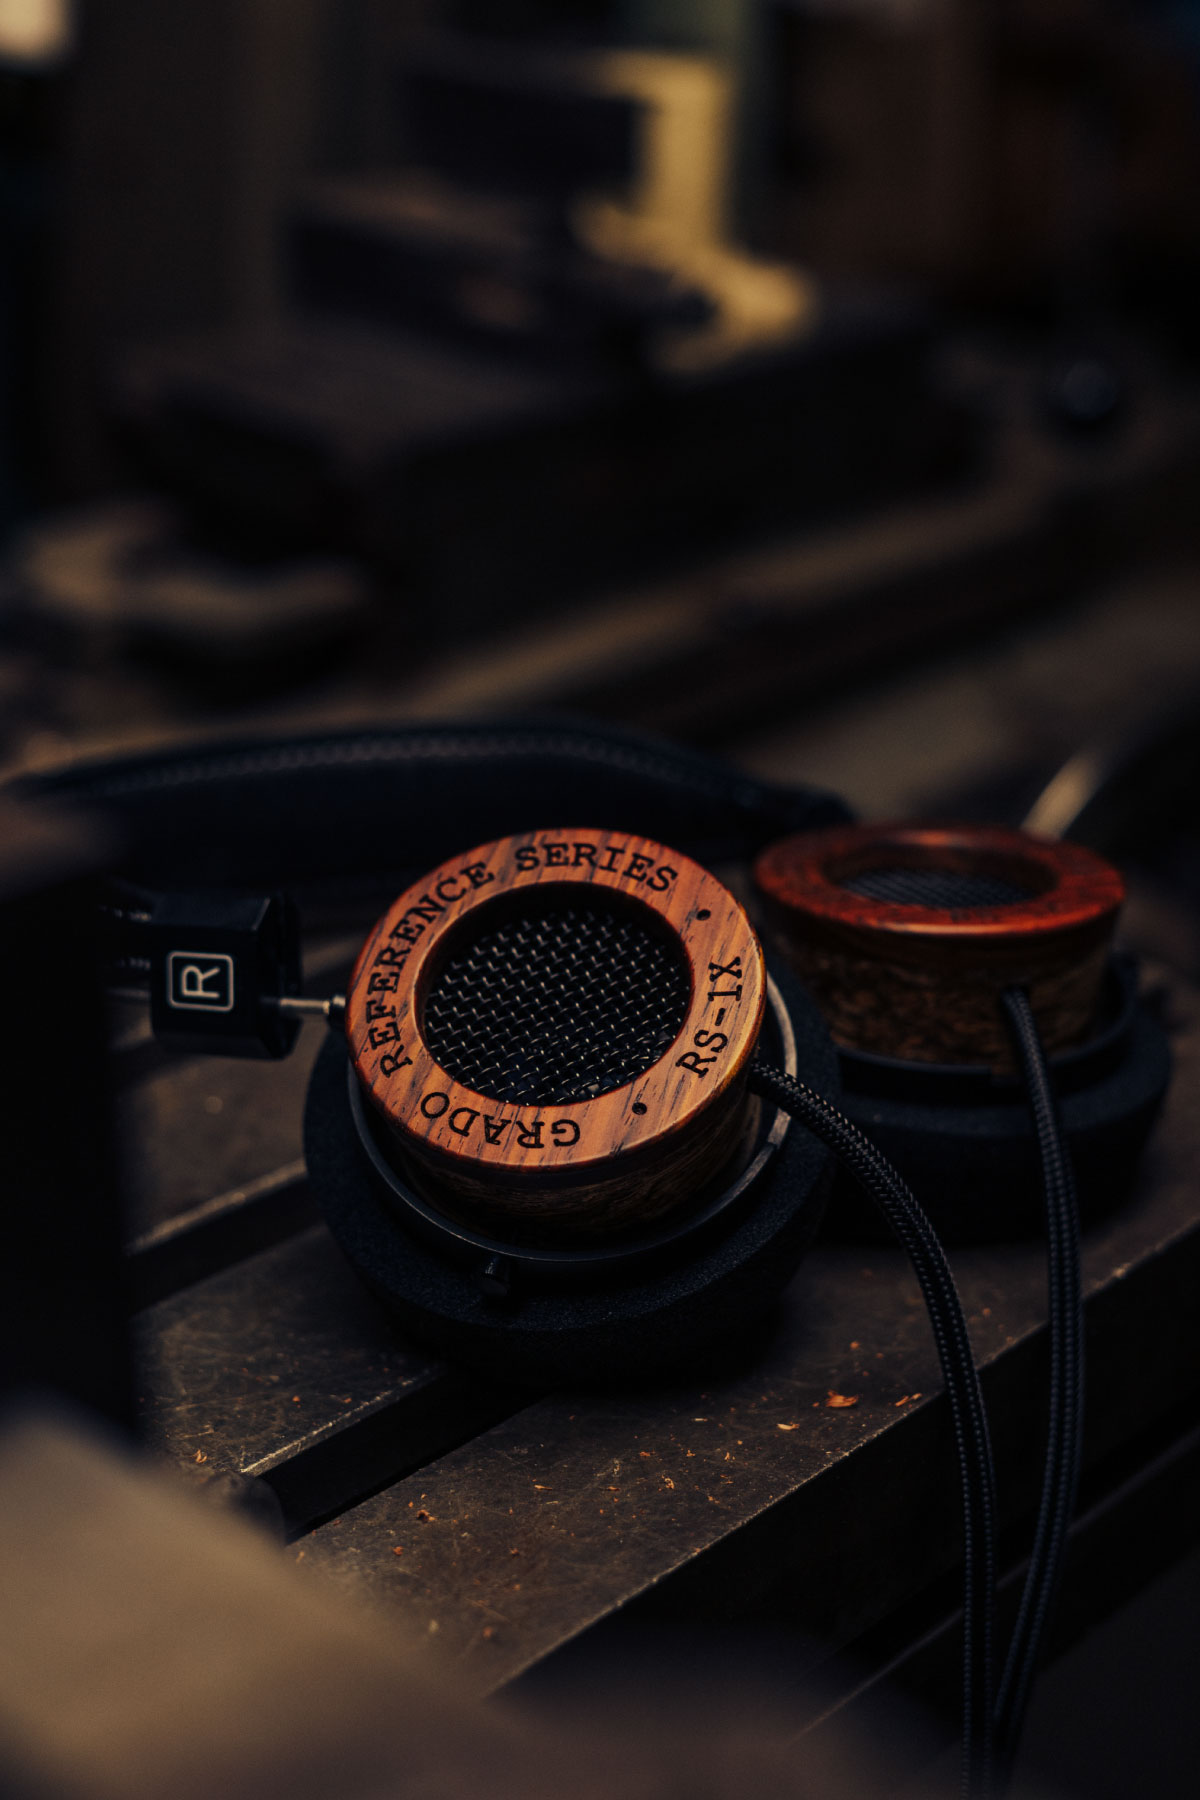 Closeup photo of the RS1 headphones resting on a workbench taken from the side.